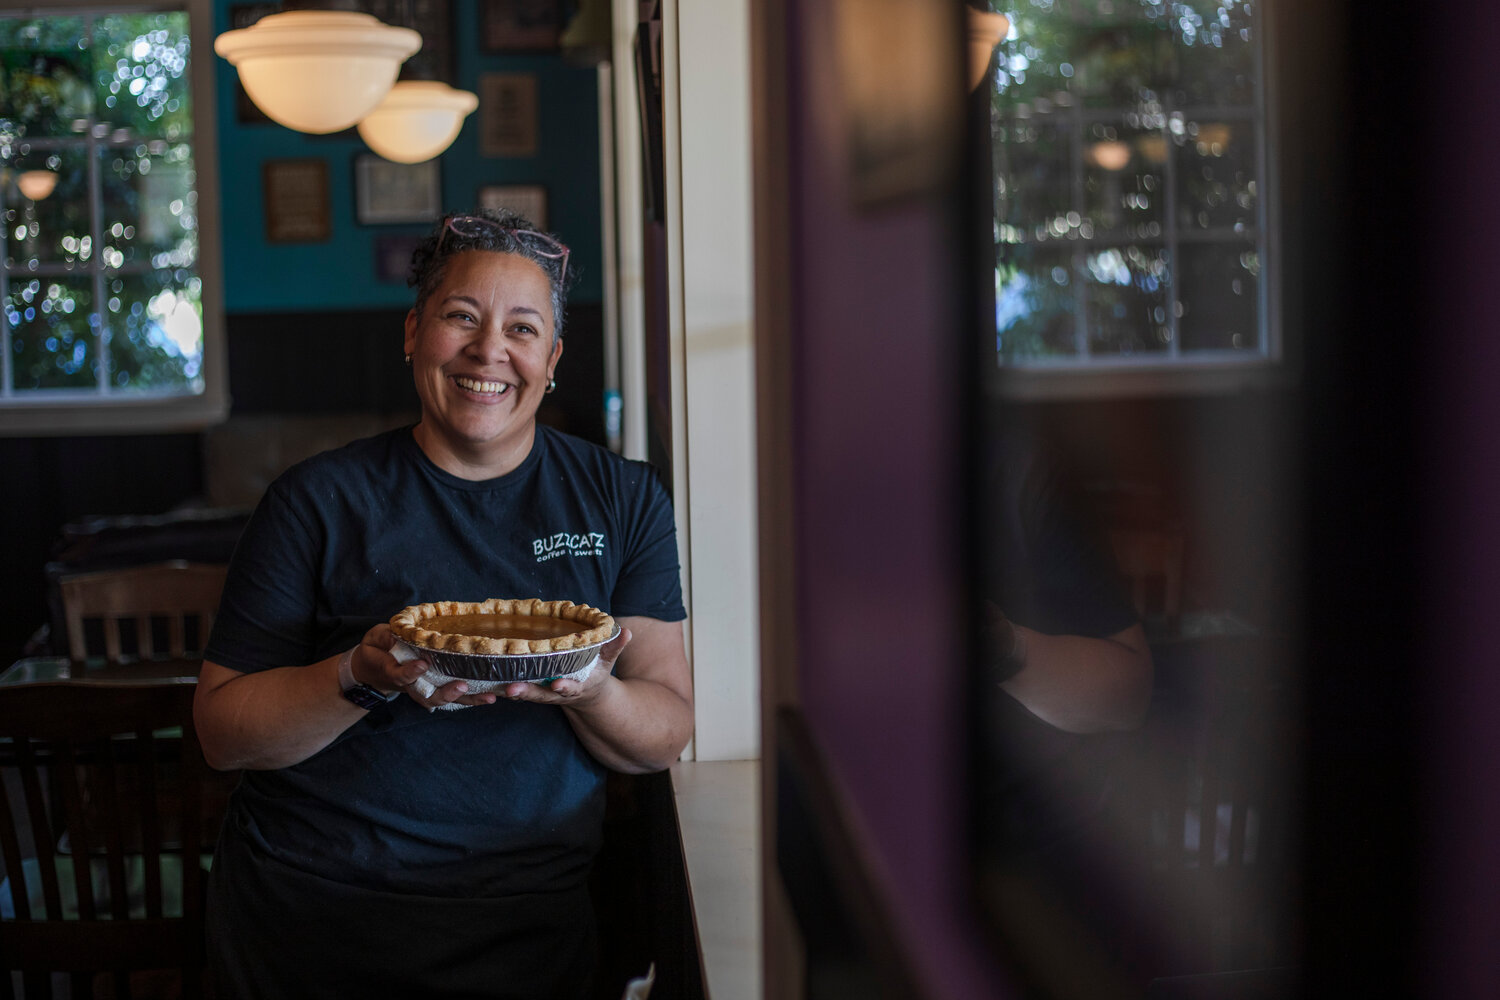 Kimberly Asbury has been a pastry chef for over 20 years and is the general manager at BuzzCatz Coffee & Sweets in Orange Beach.